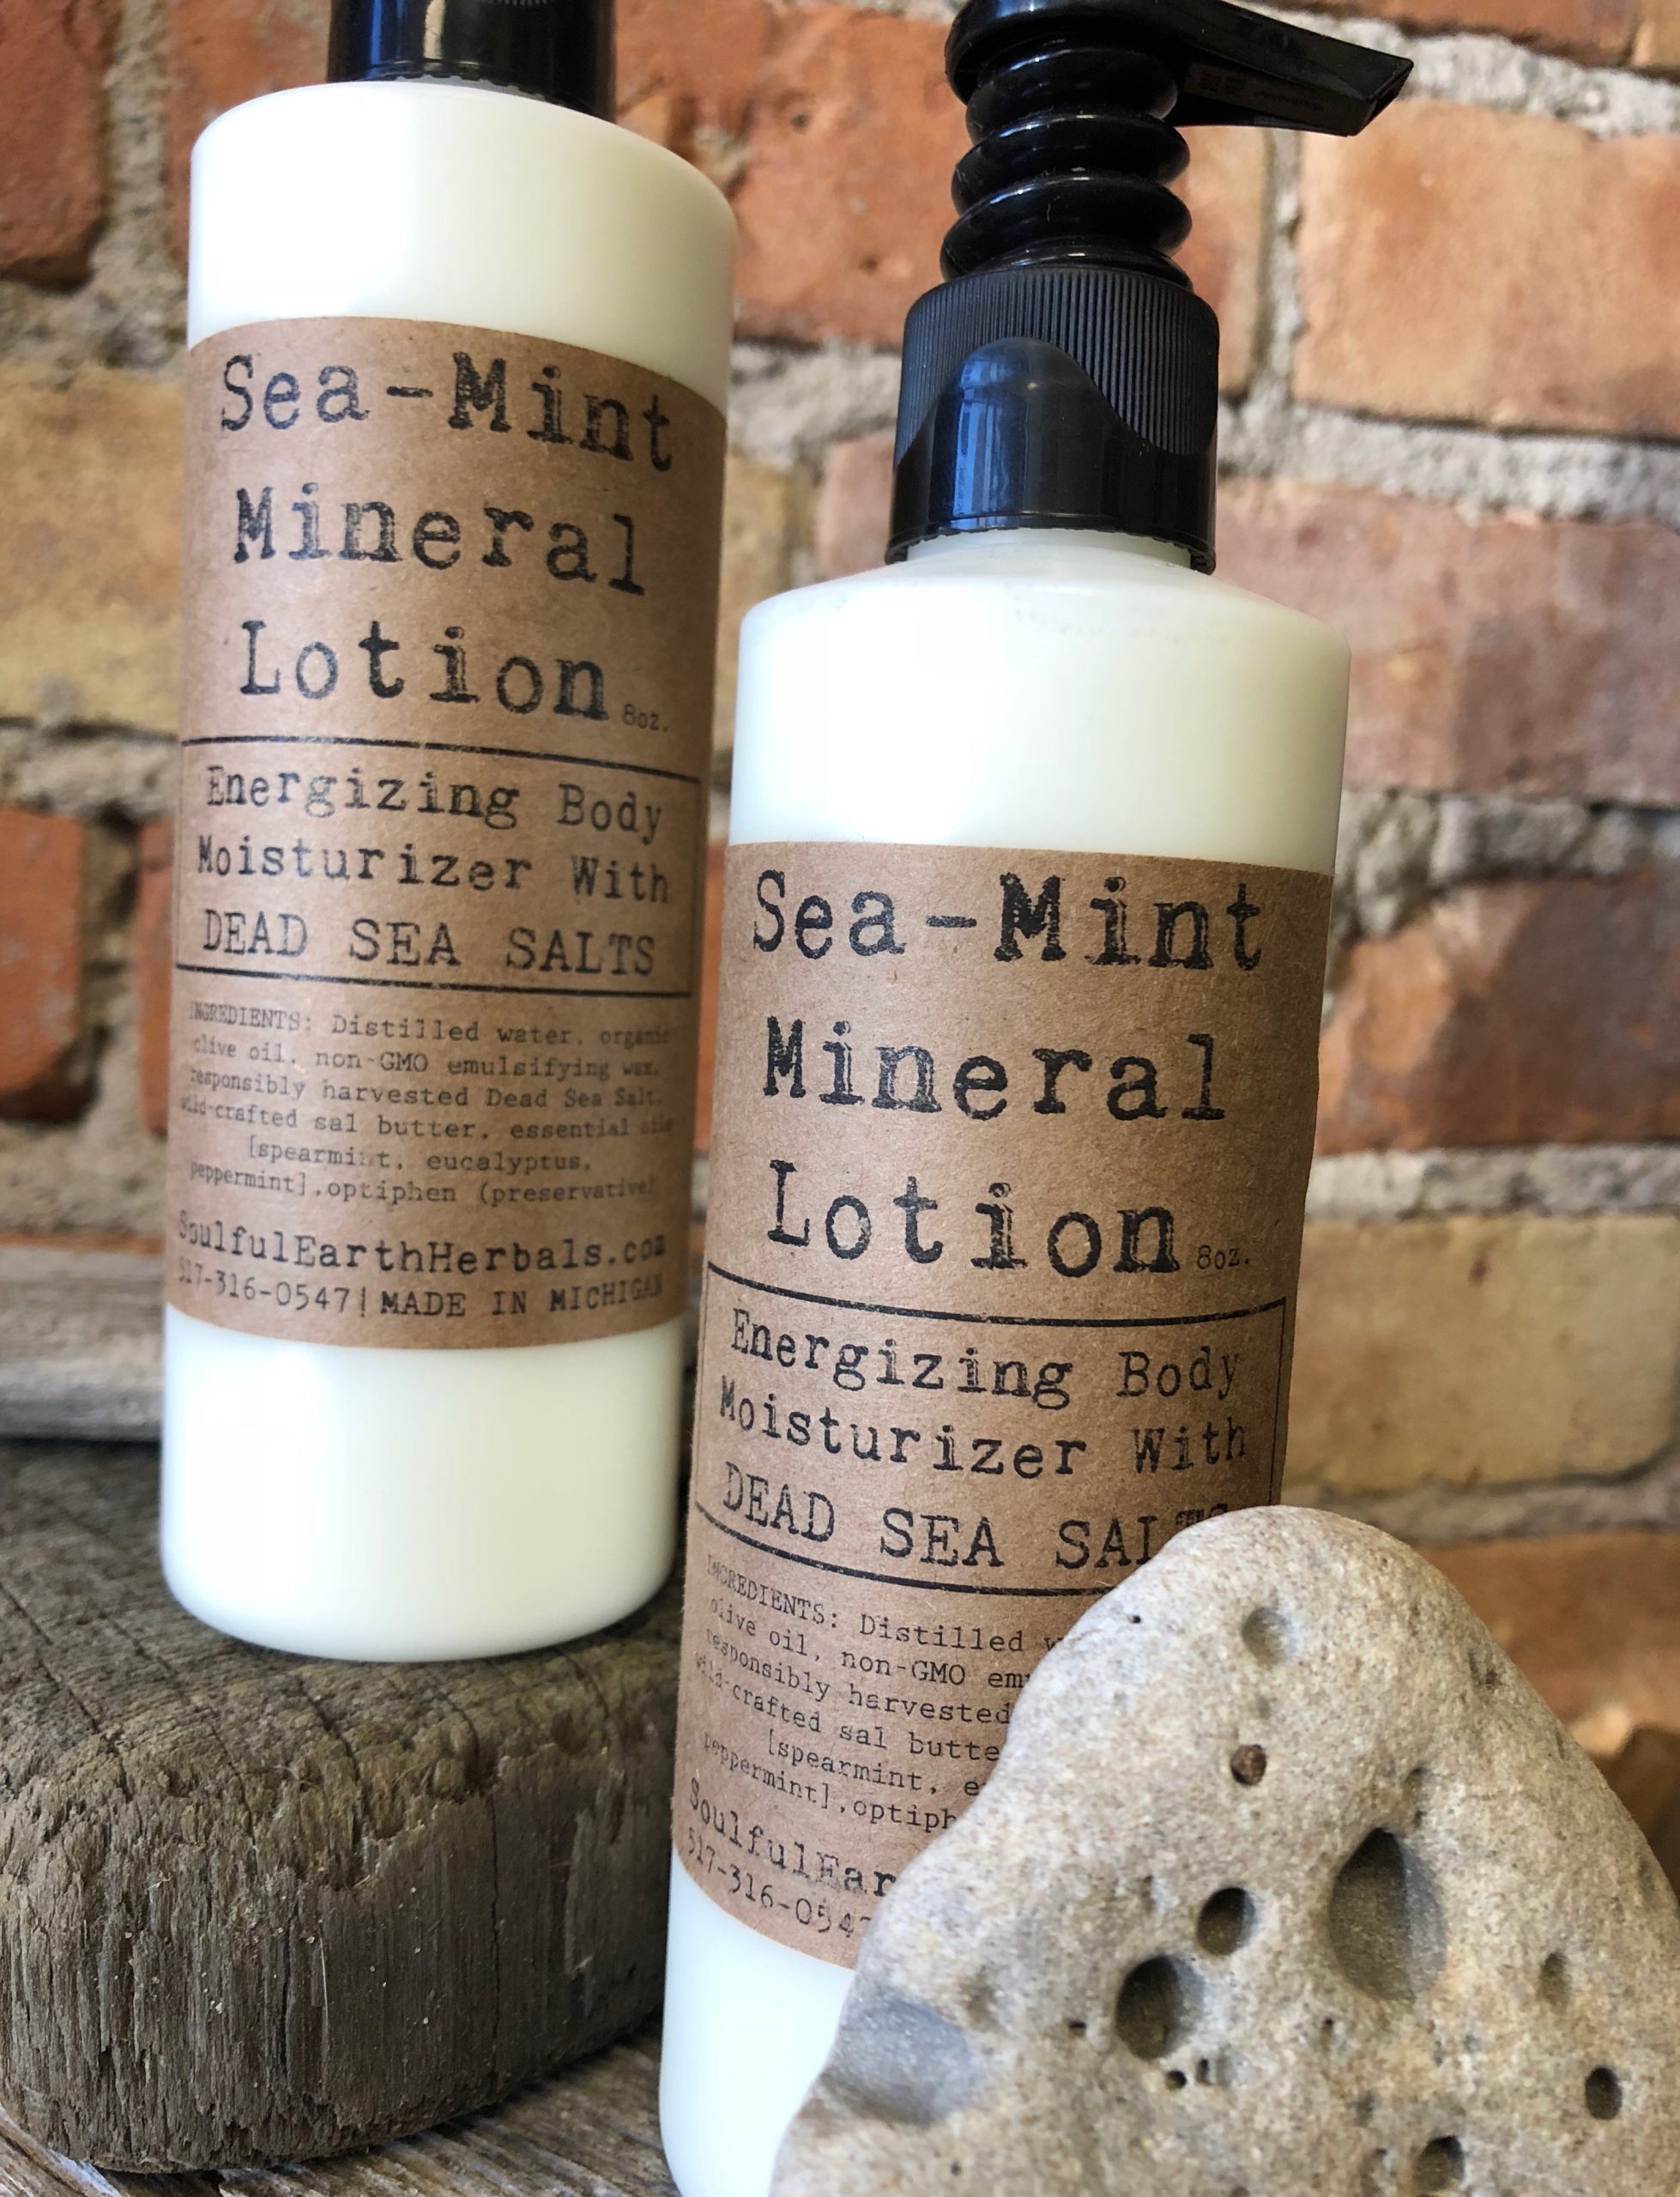 Sea-Mint Mineral Lotion – Soulful Herbals